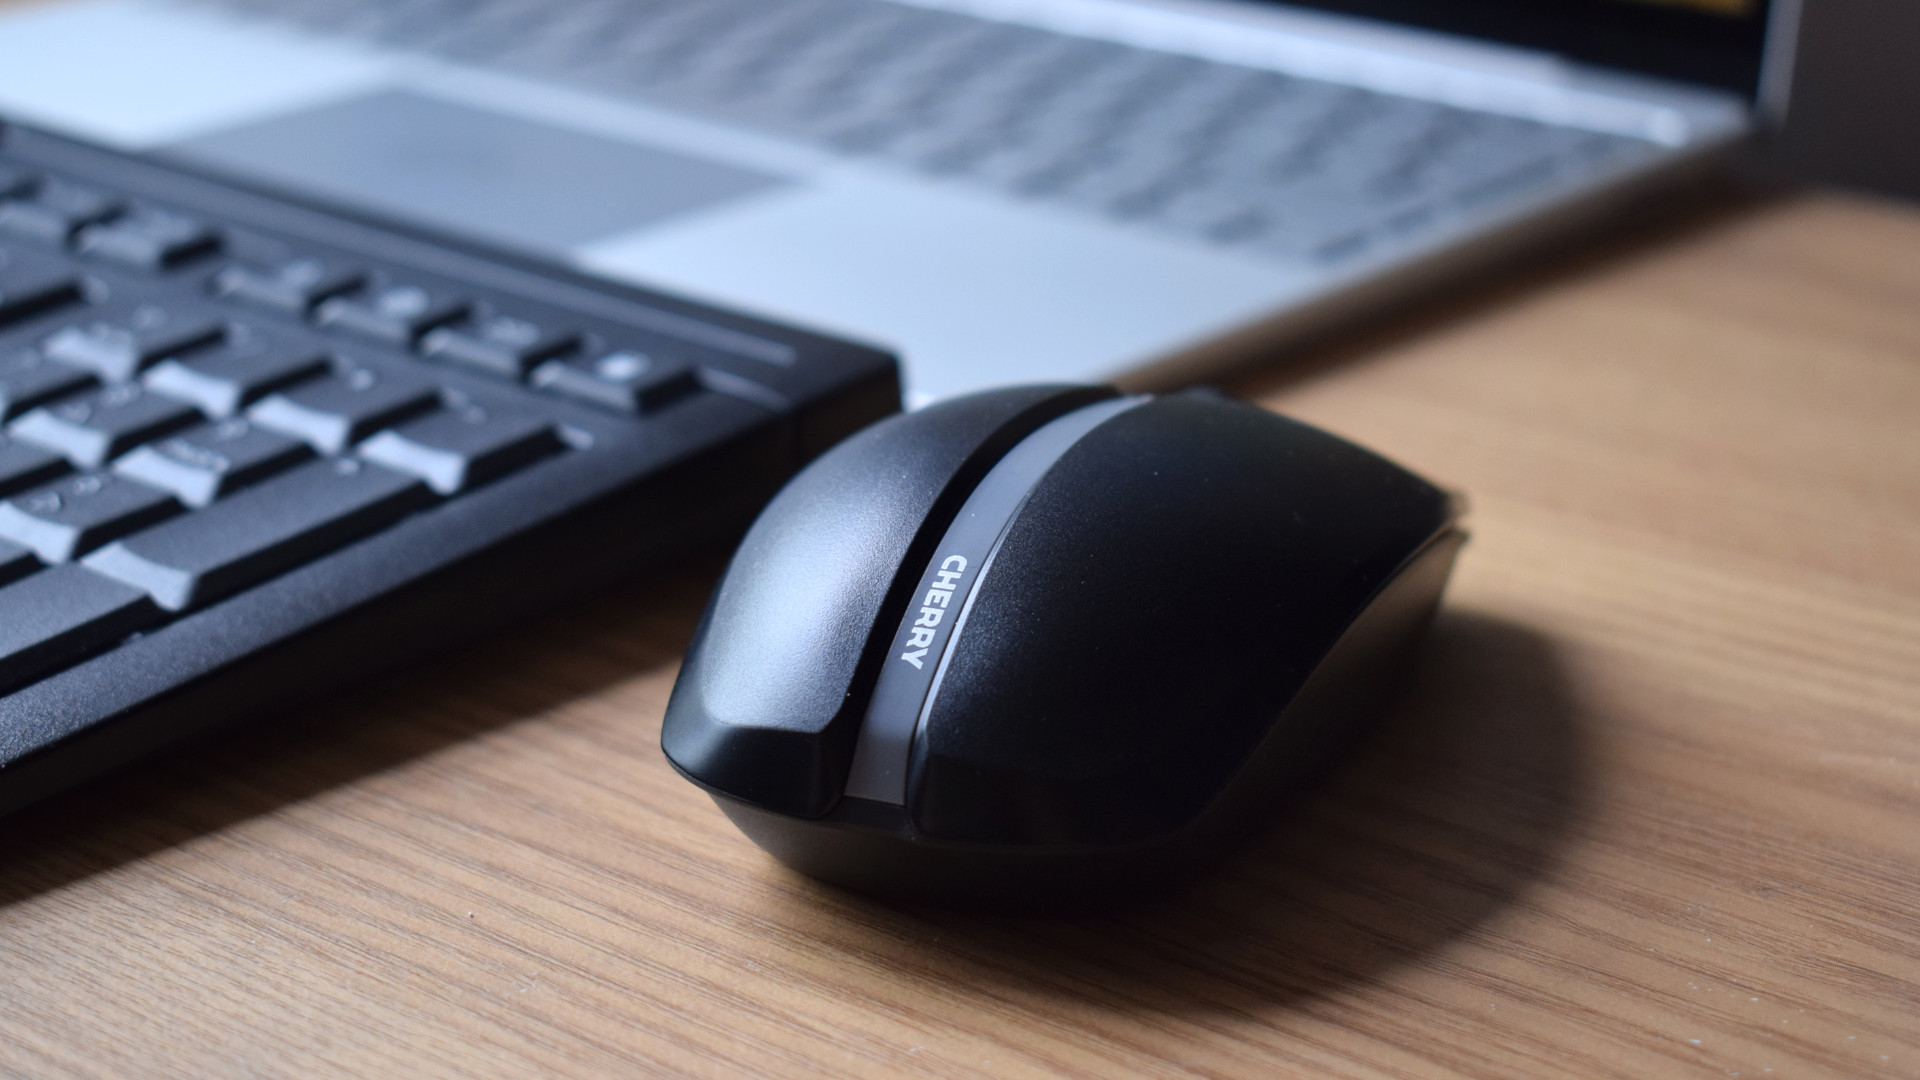 Cherry Stream Desktop Keyboard and Mouse combo review photos